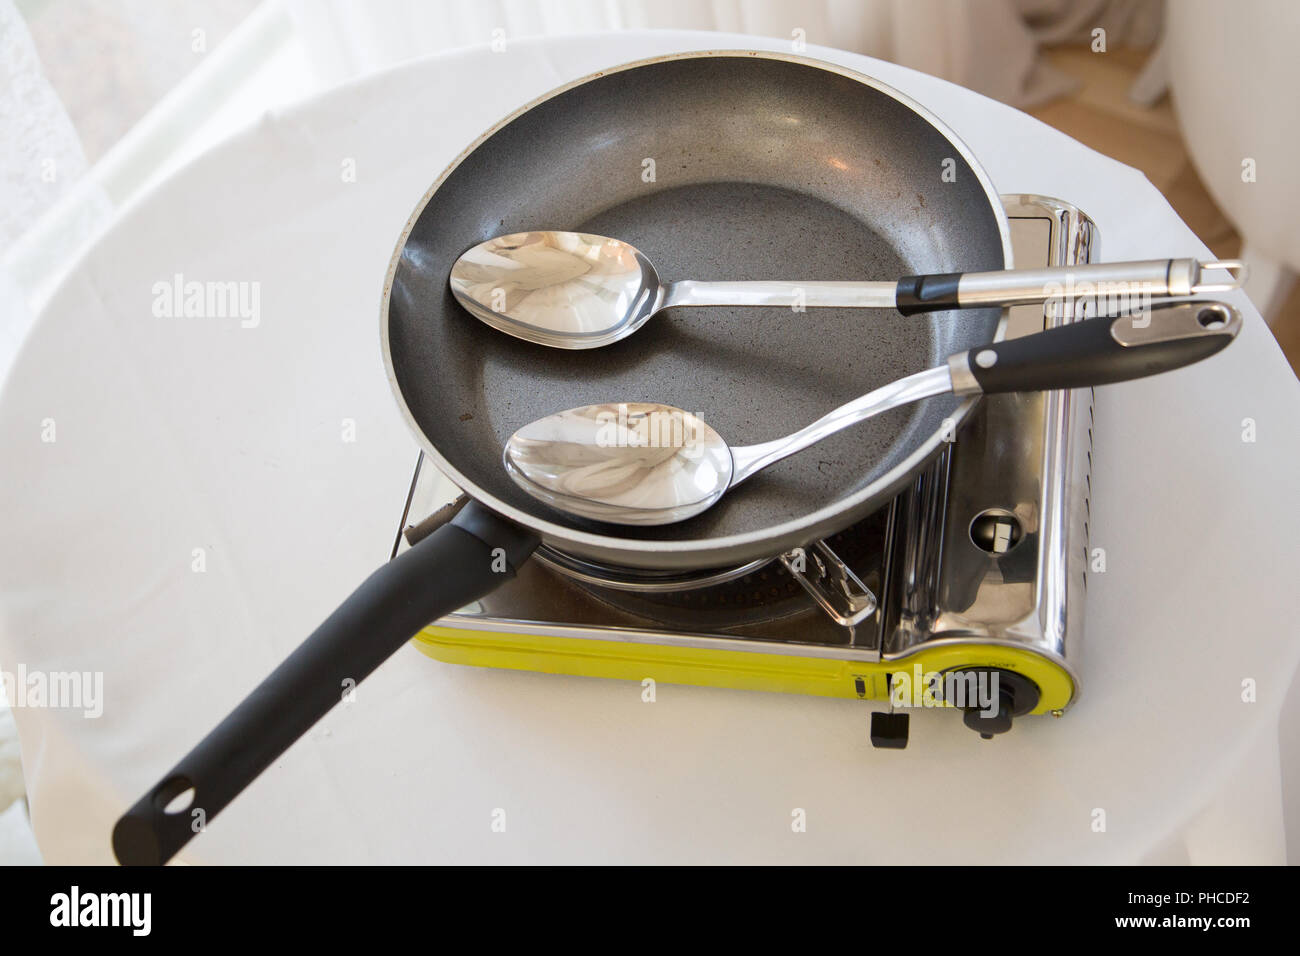 Portable gas stove on the table Stock Photo